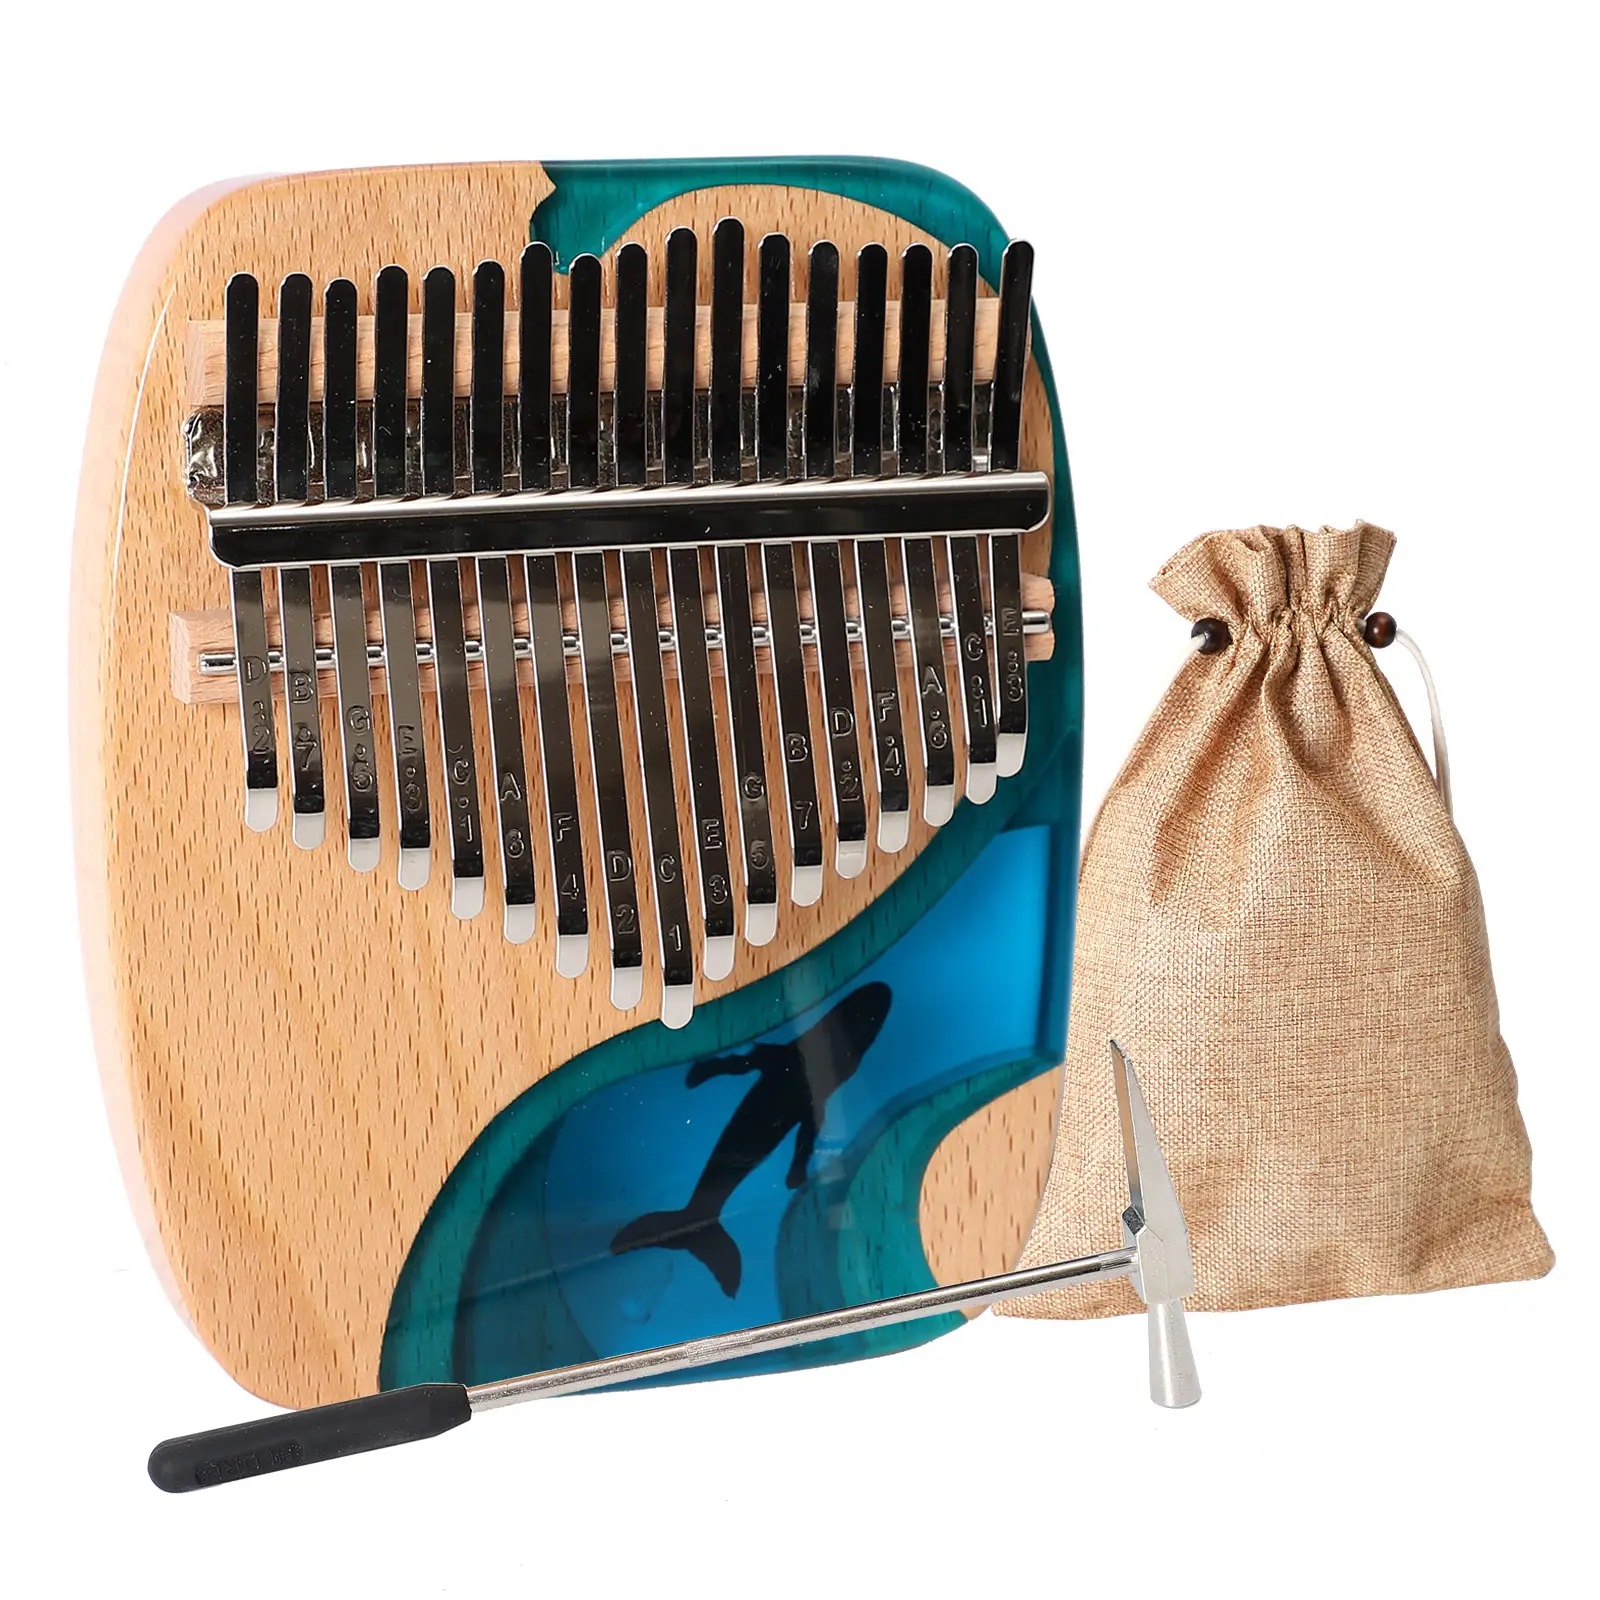 New popular Kalimba wholesale and customizable Wooden 17 keys this year's most popular musical instrument Kalimba